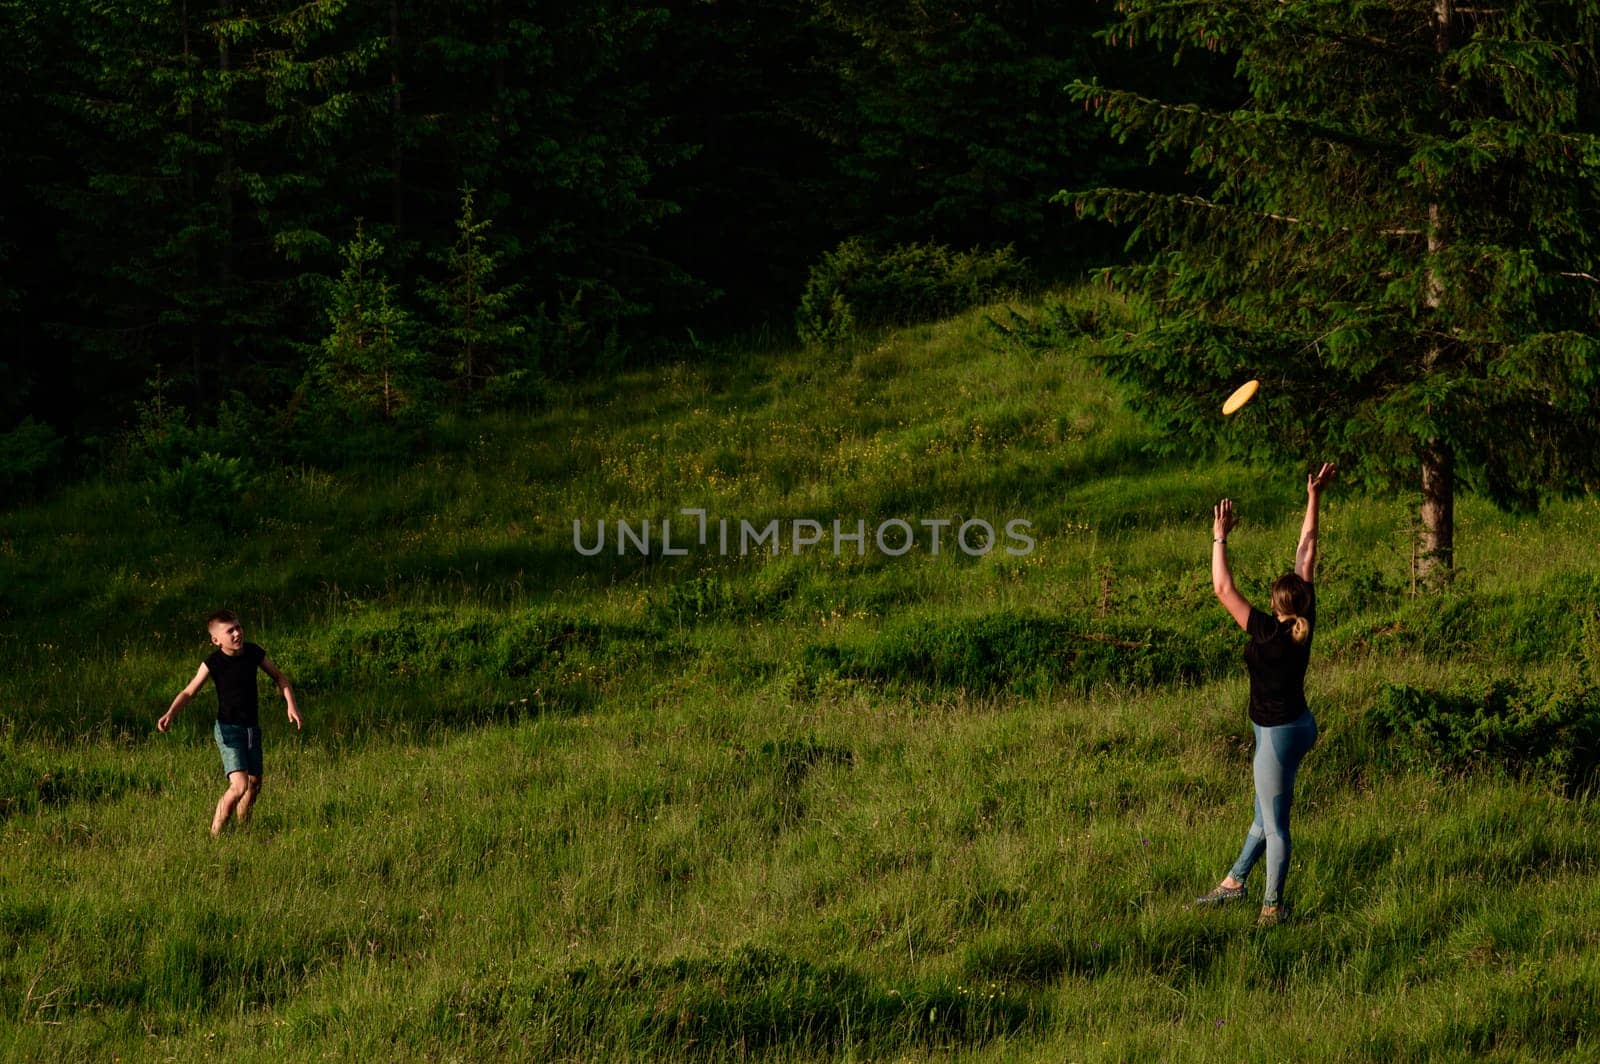 Mother and sons play frisbee, active recreation in the mountains of mothers and children.